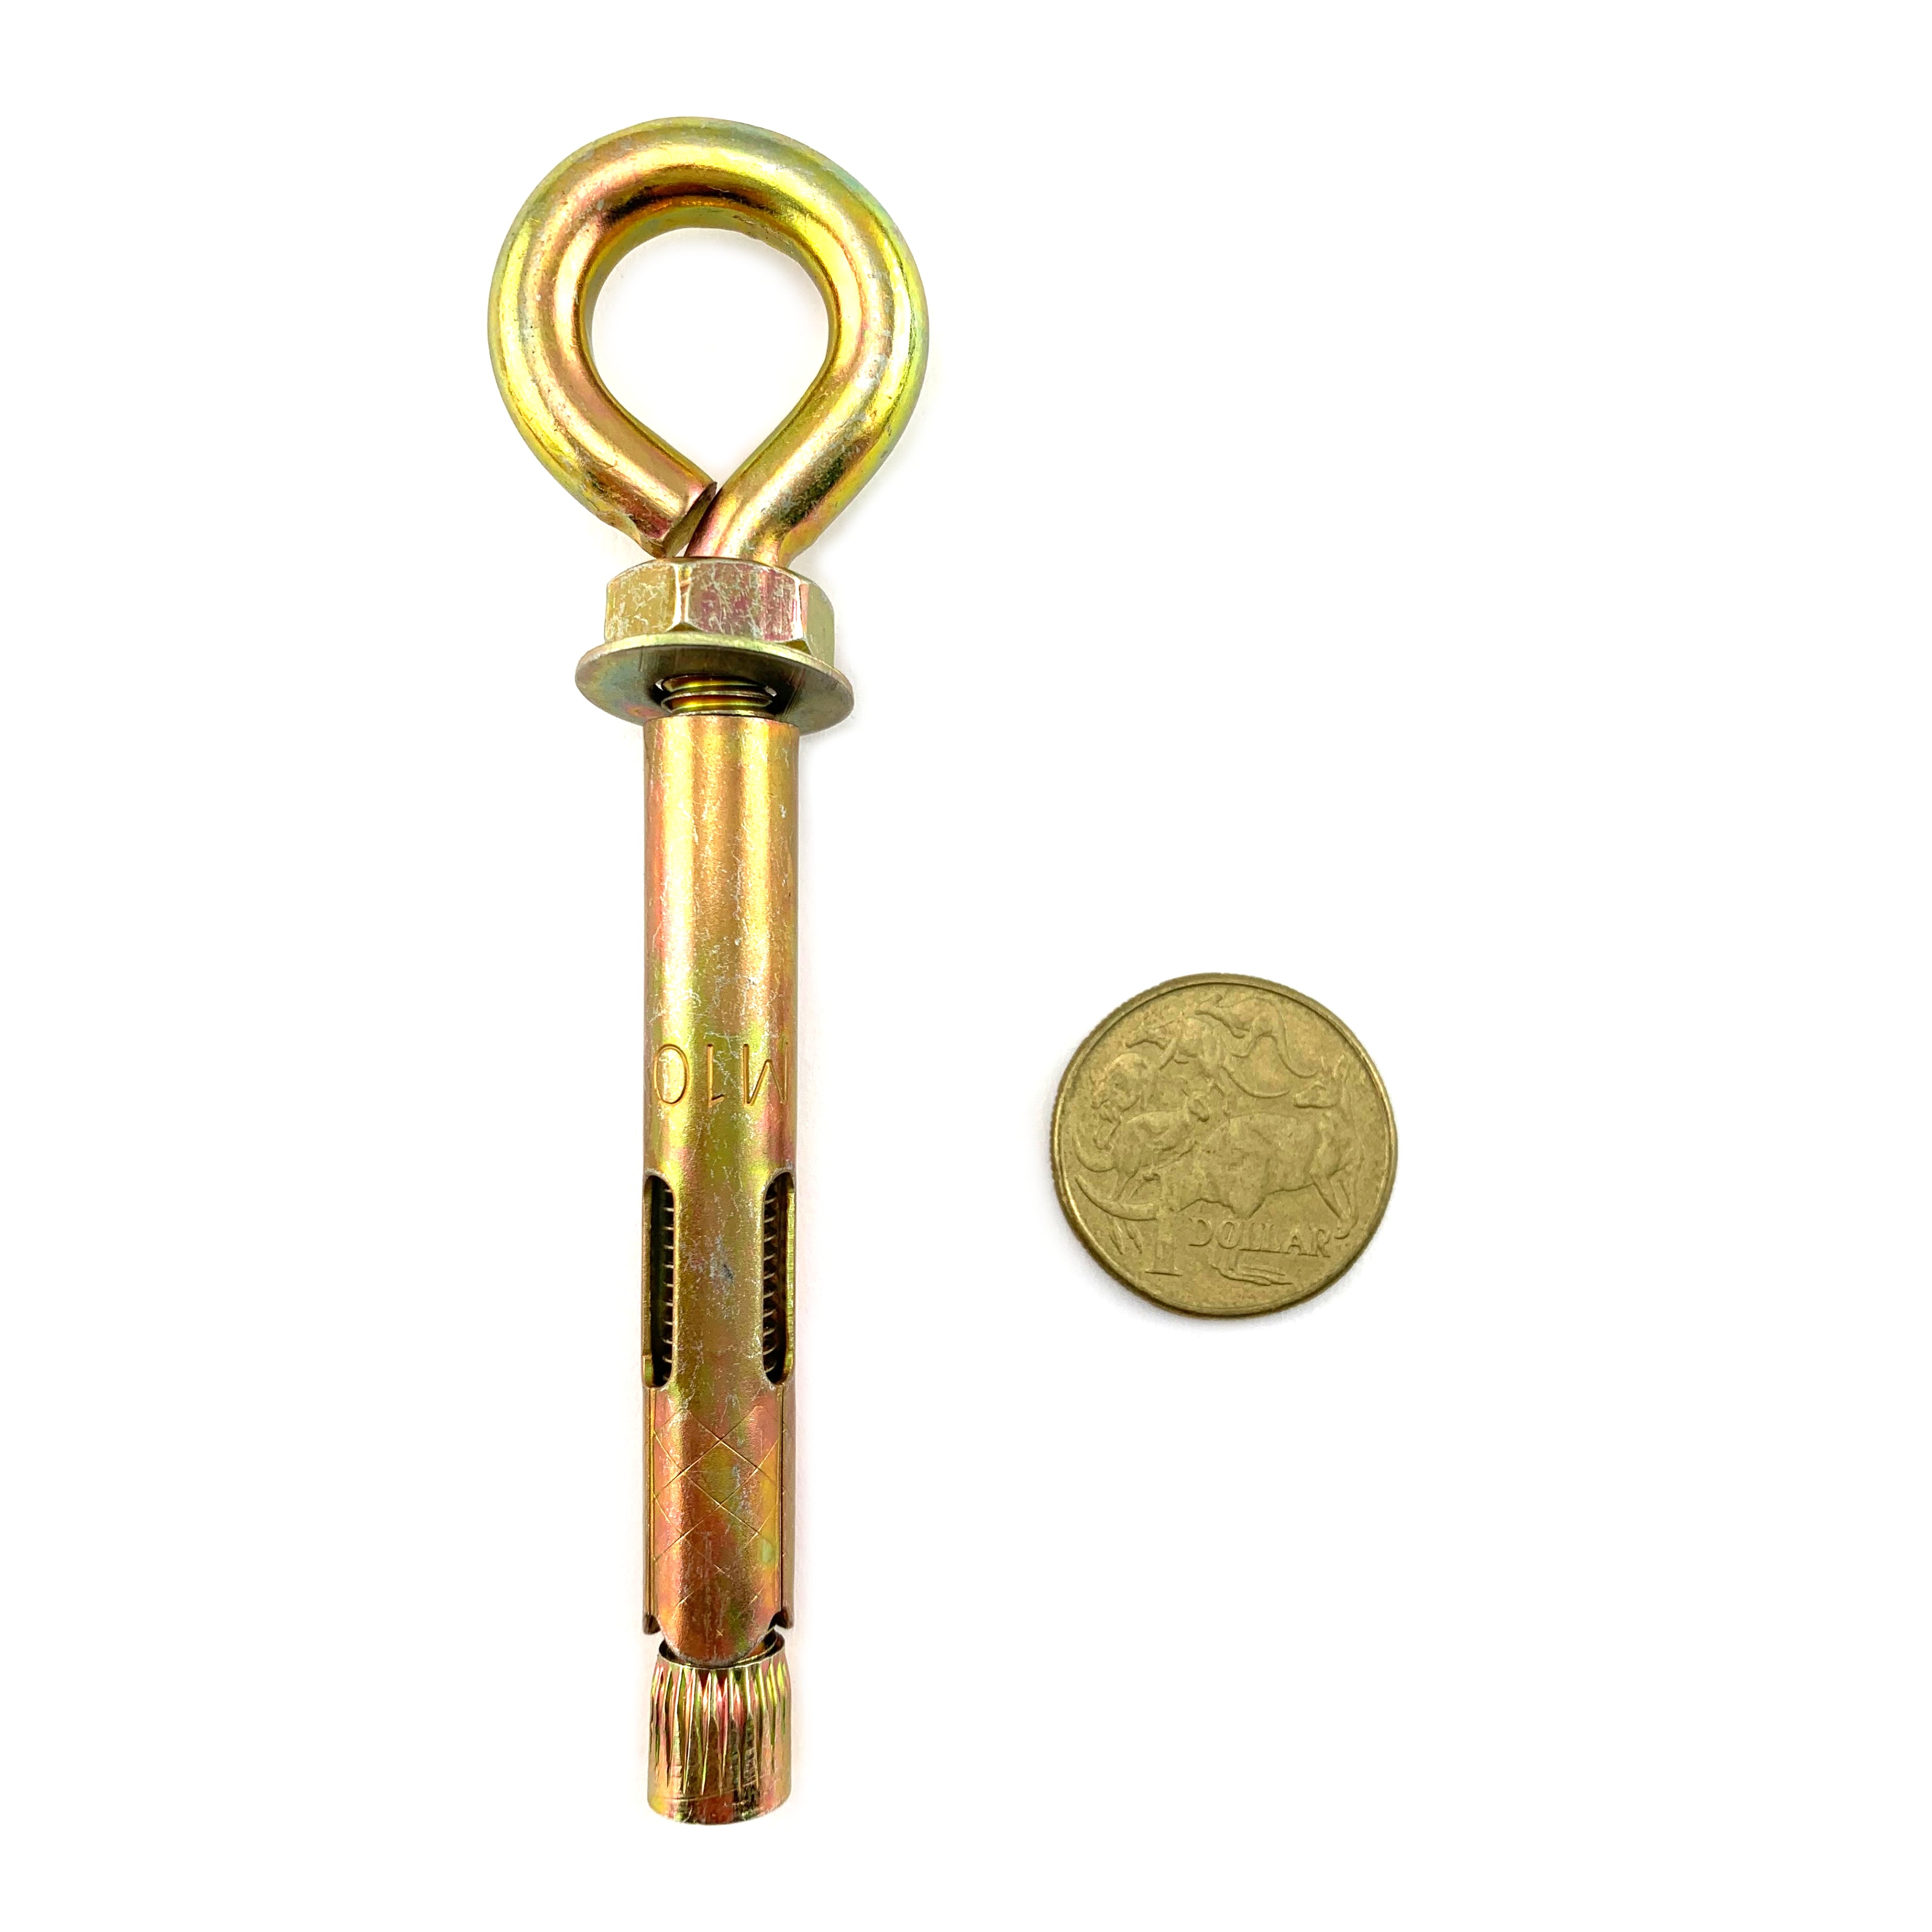 Eye anchor bolt in zinc passivated gold finish, size 8mm. Australia. Shop hardware online. Shipping or Melbourne click & collect